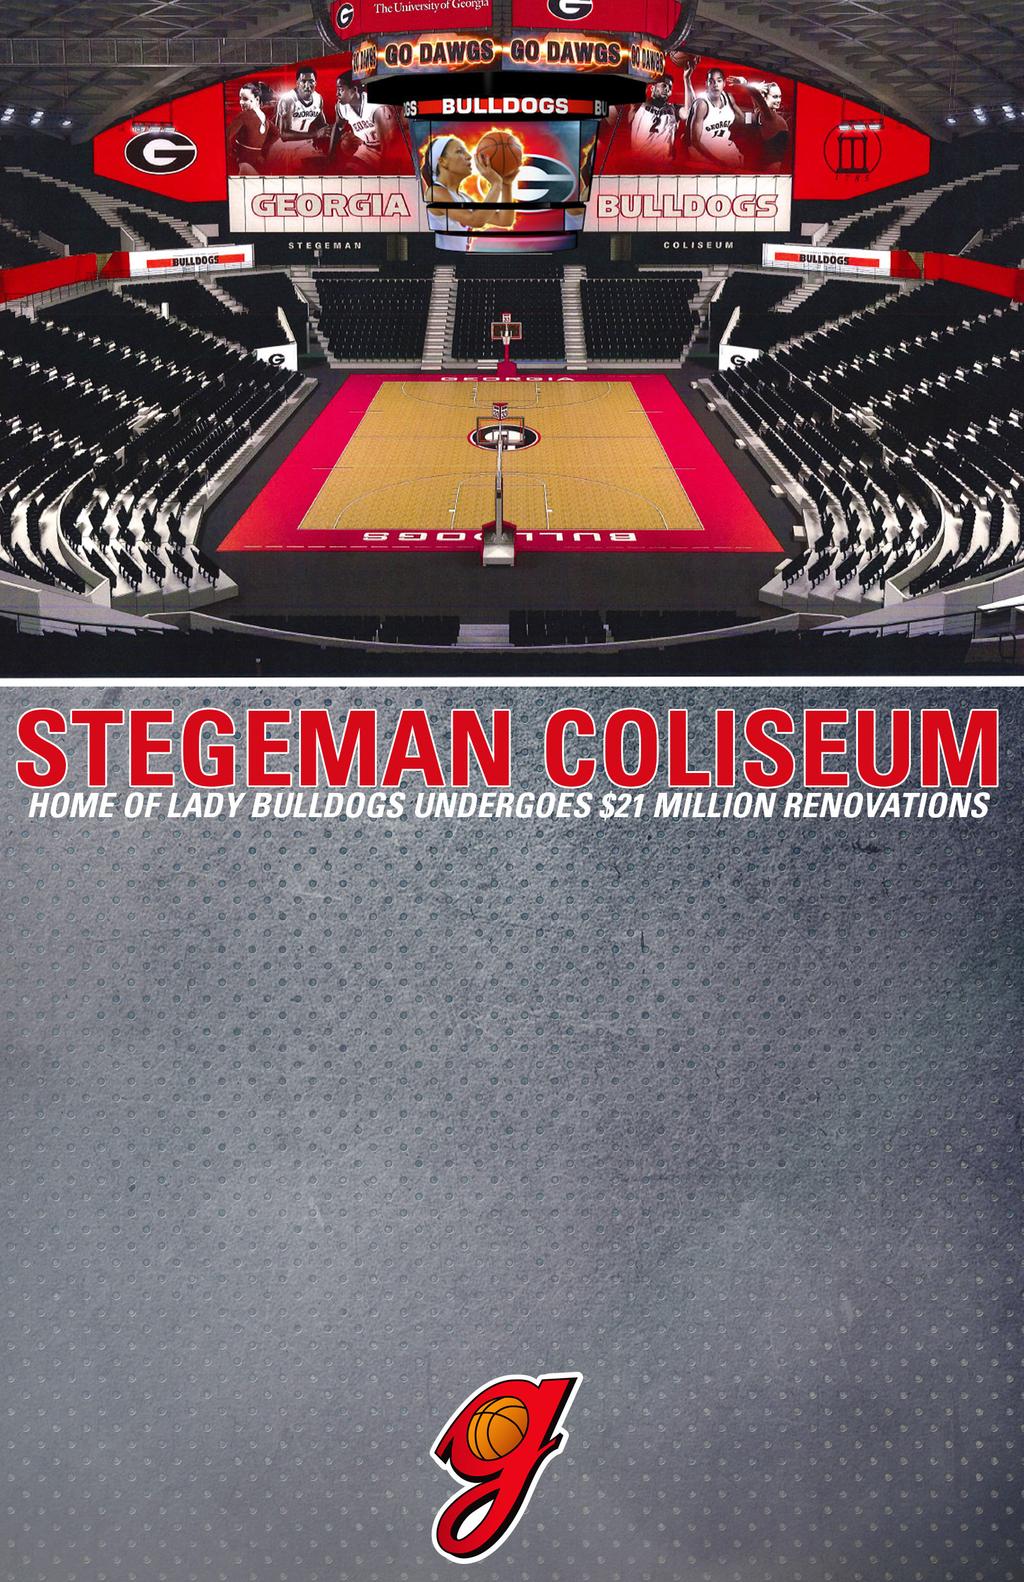 Stegeman Coliseum is undergoing major renovations this summer. Work began recently on Phase II of the approximately $8-million project to the Coliseum s interior.